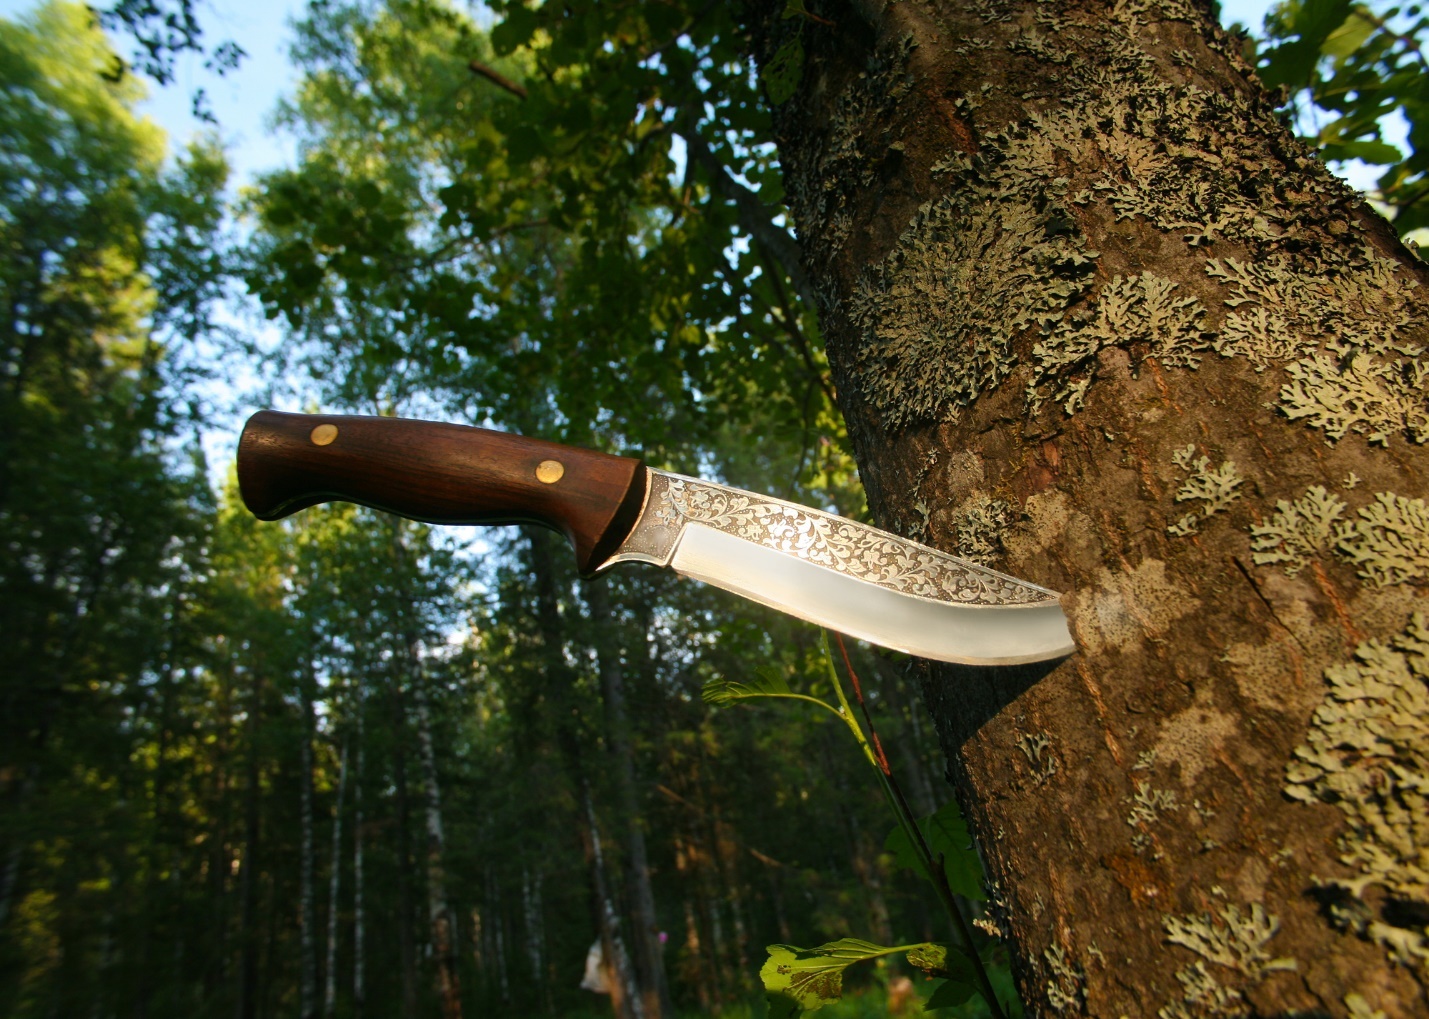 A knife on a tree

Description automatically generated with medium confidence